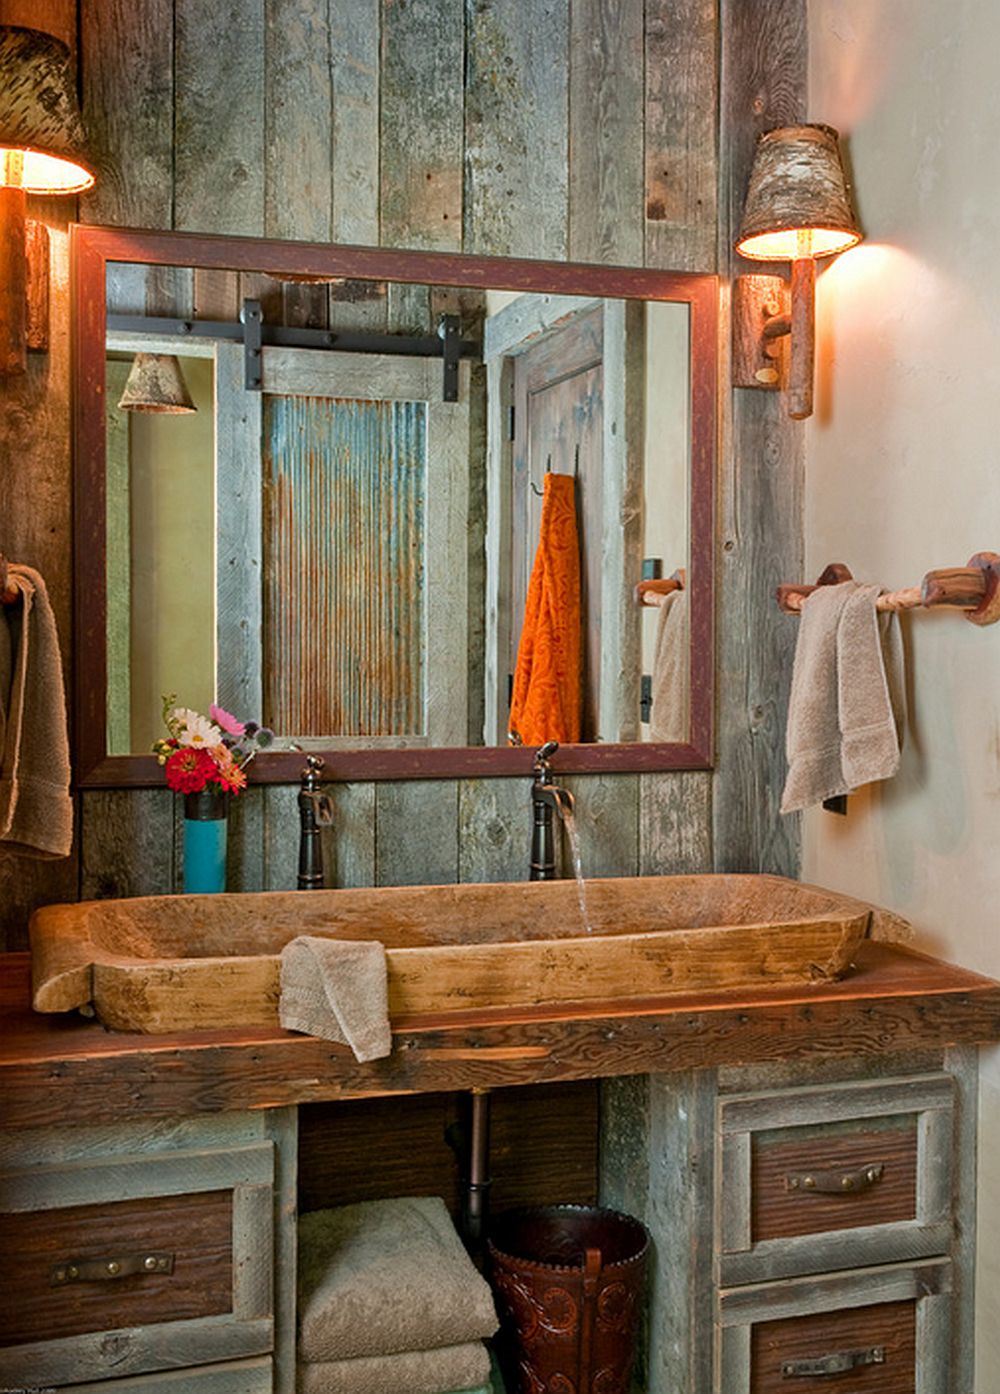 31 Best Rustic Bathroom Design and Decor Ideas for 2020